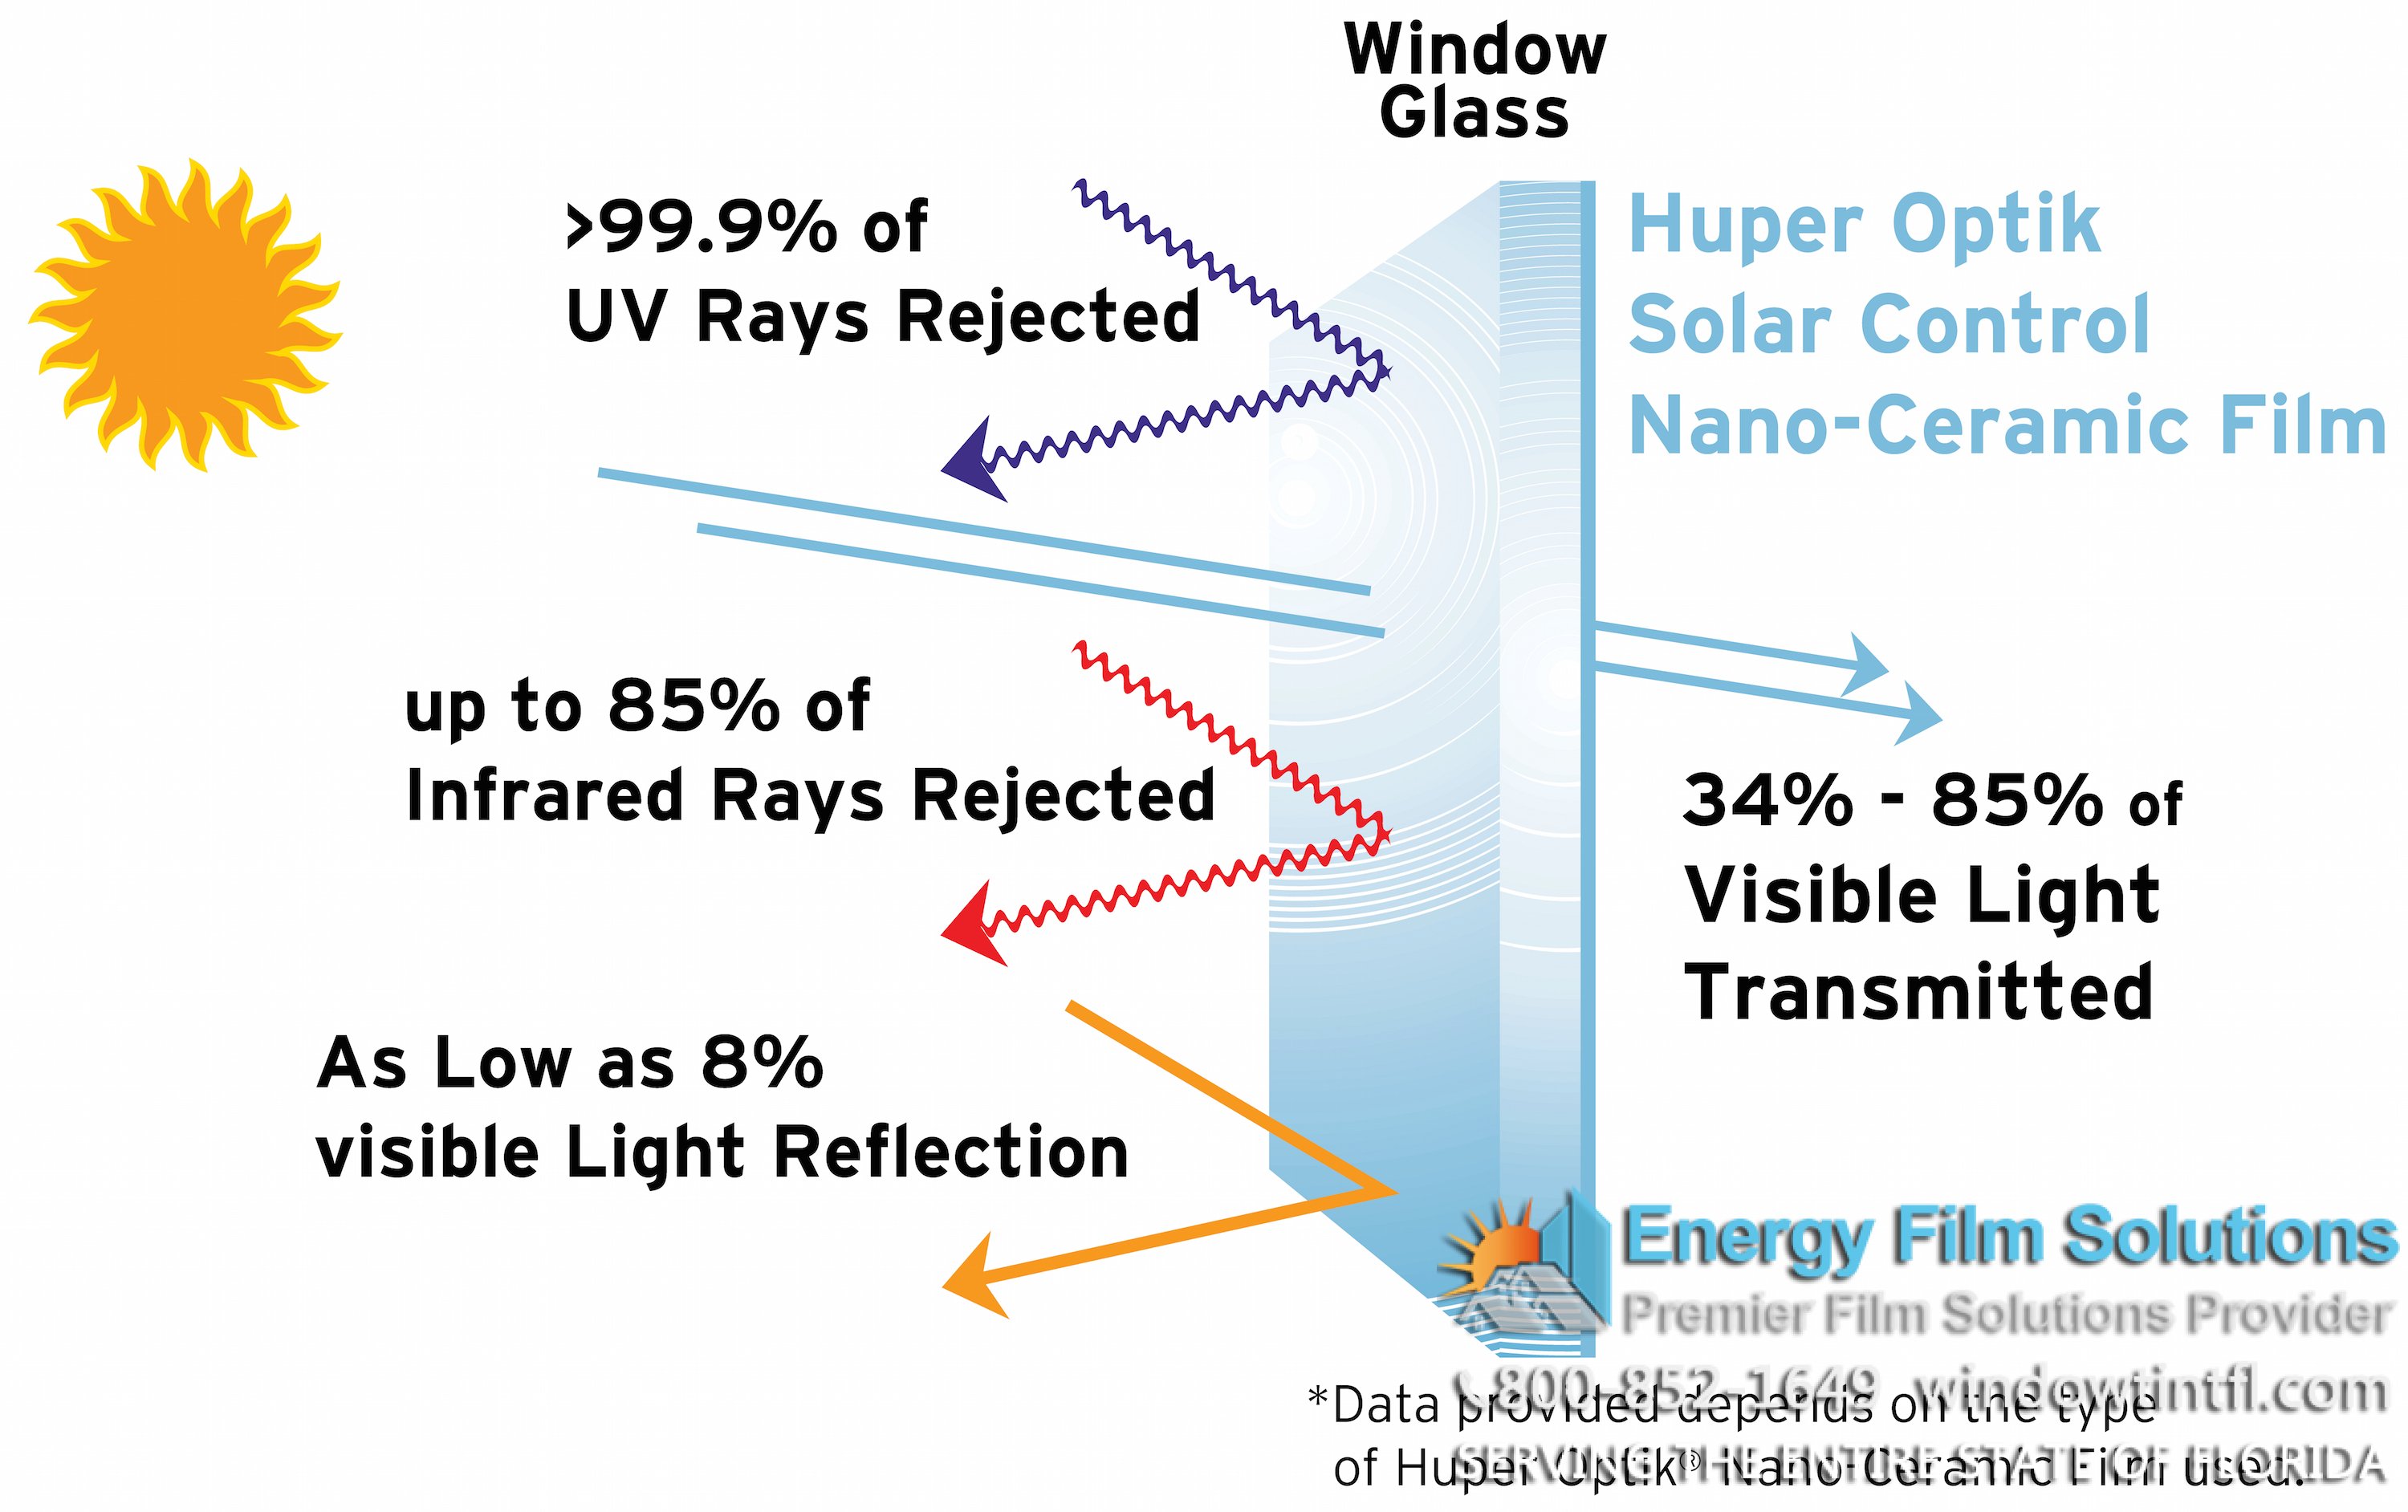 window-tint-tax-incentives-and-rebates-for-energy-efficient-window-film